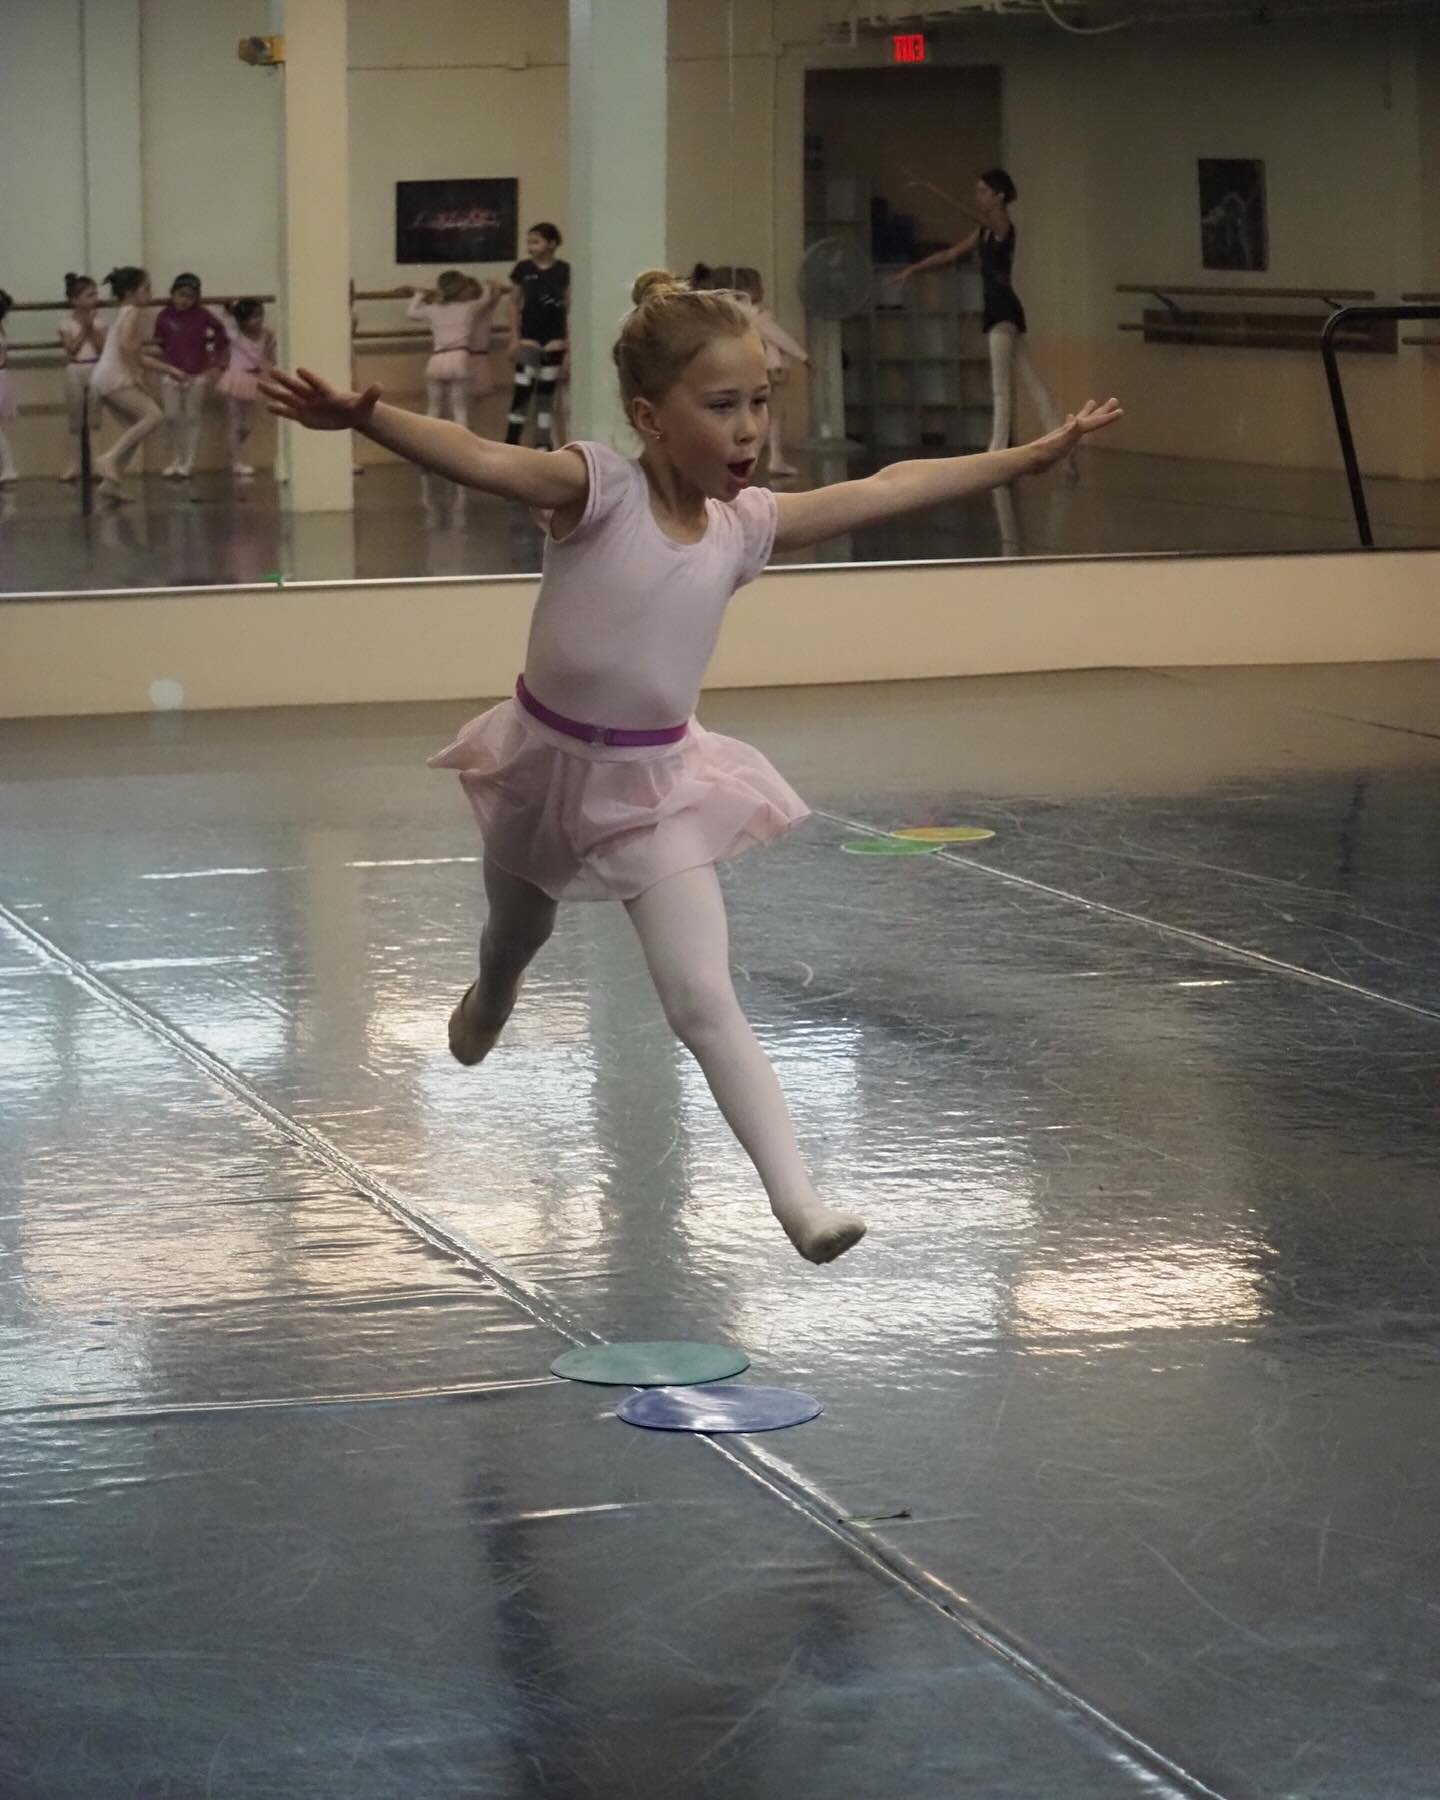 We love to fly and we teach them young! We have classes starting at 3 yo! Check out more info on our website or DM! 

#ballet #ballerinas #bunheads #balletgram #balletpost #balletlove #loveofballet #instaballet #instagramballerinas #beautifulballerin